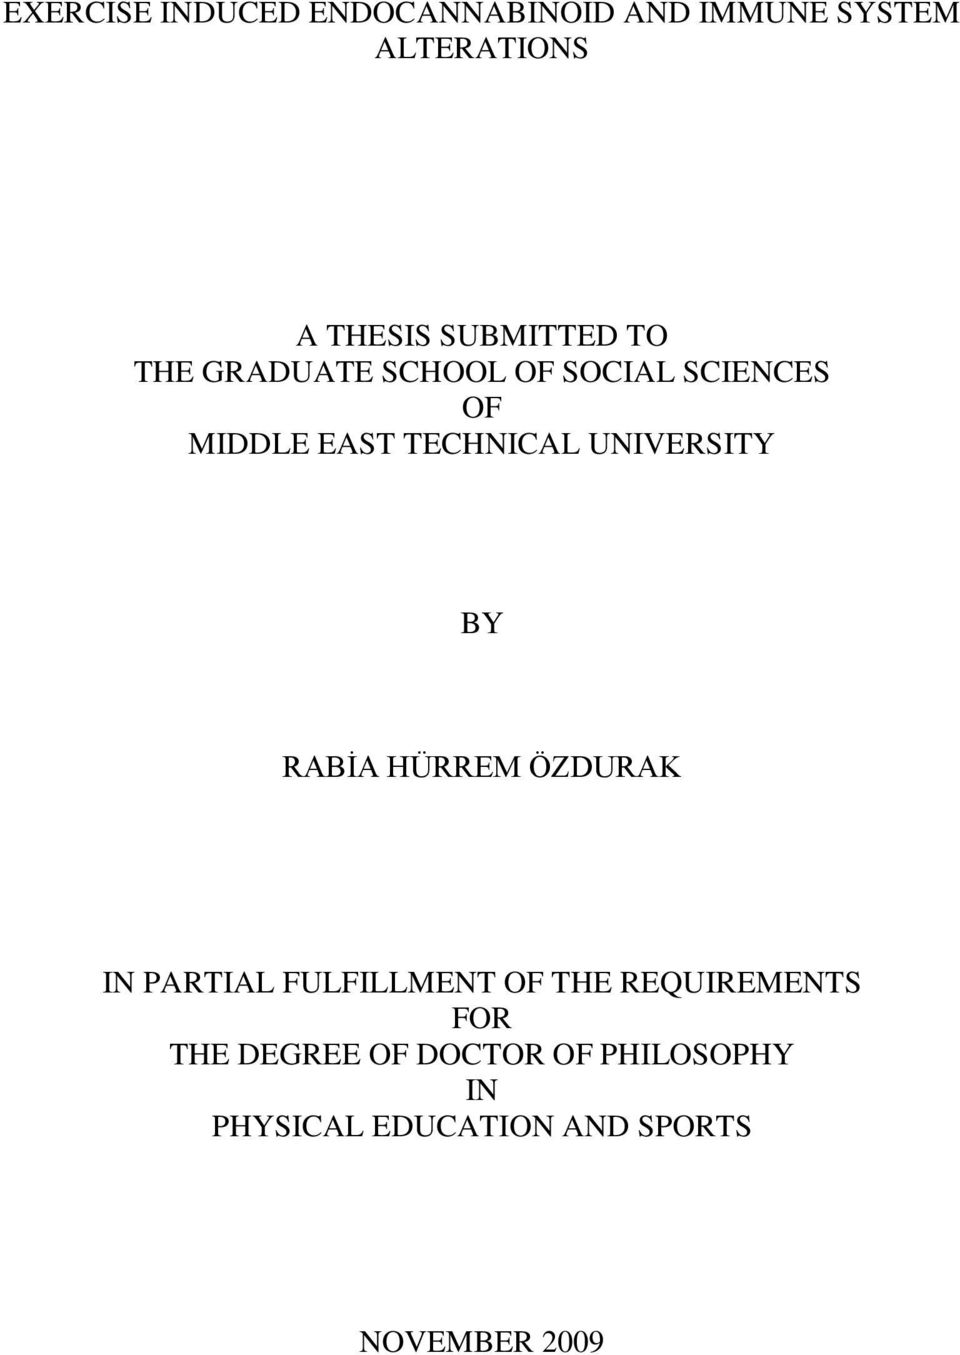 UNIVERSITY BY RABİA HÜRREM ÖZDURAK IN PARTIAL FULFILLMENT OF THE REQUIREMENTS